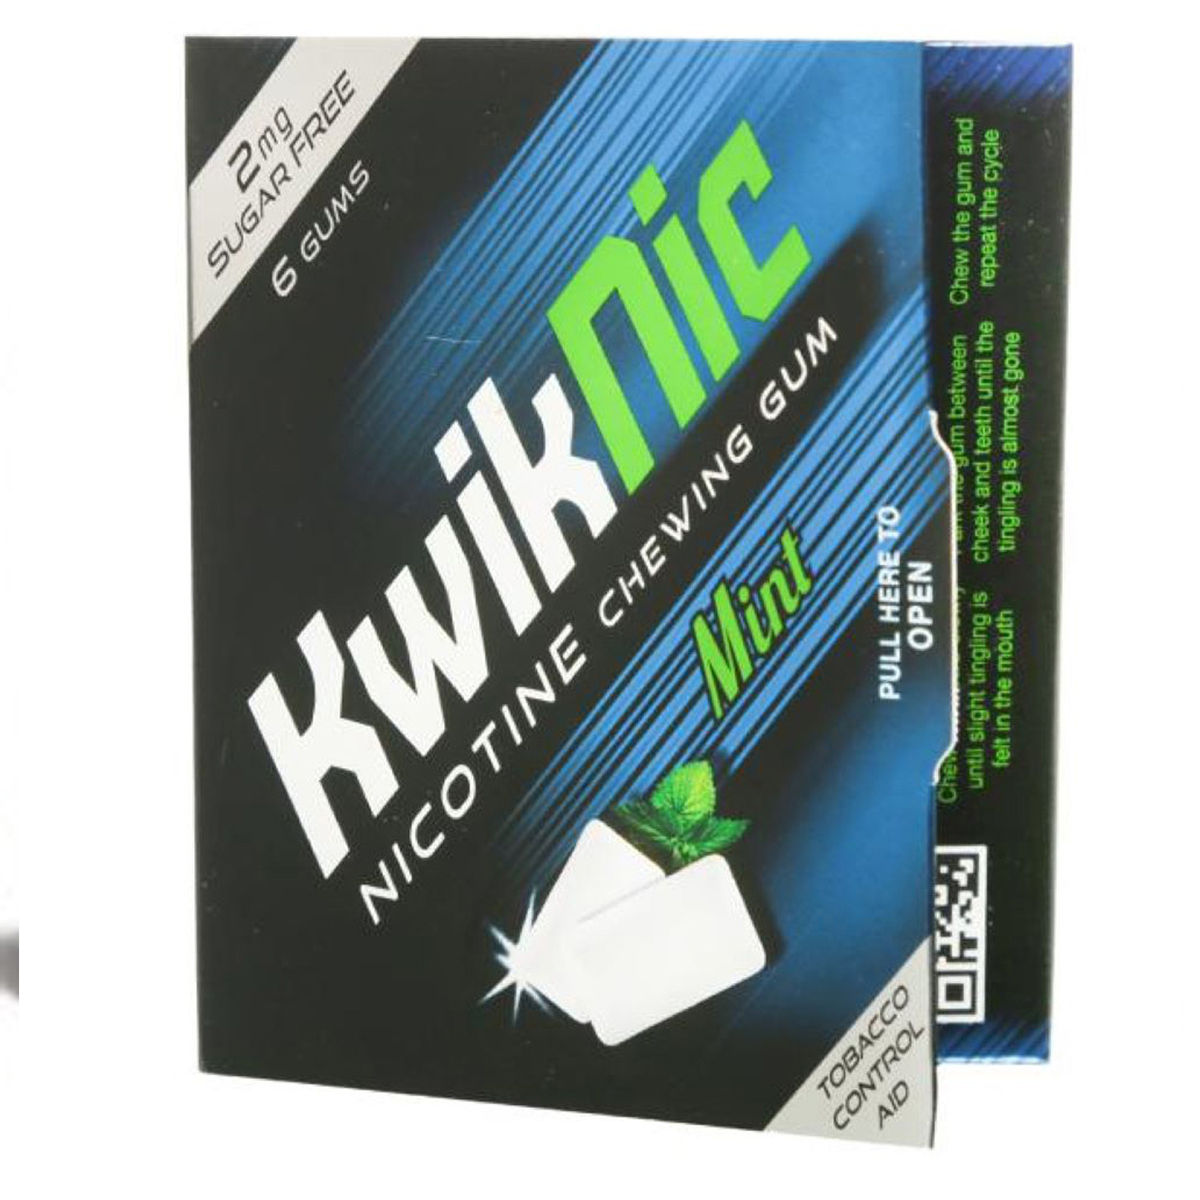 Buy Kwiknic Nicotine 2 mg Mint Flavour, 6 Chewing Gum Online